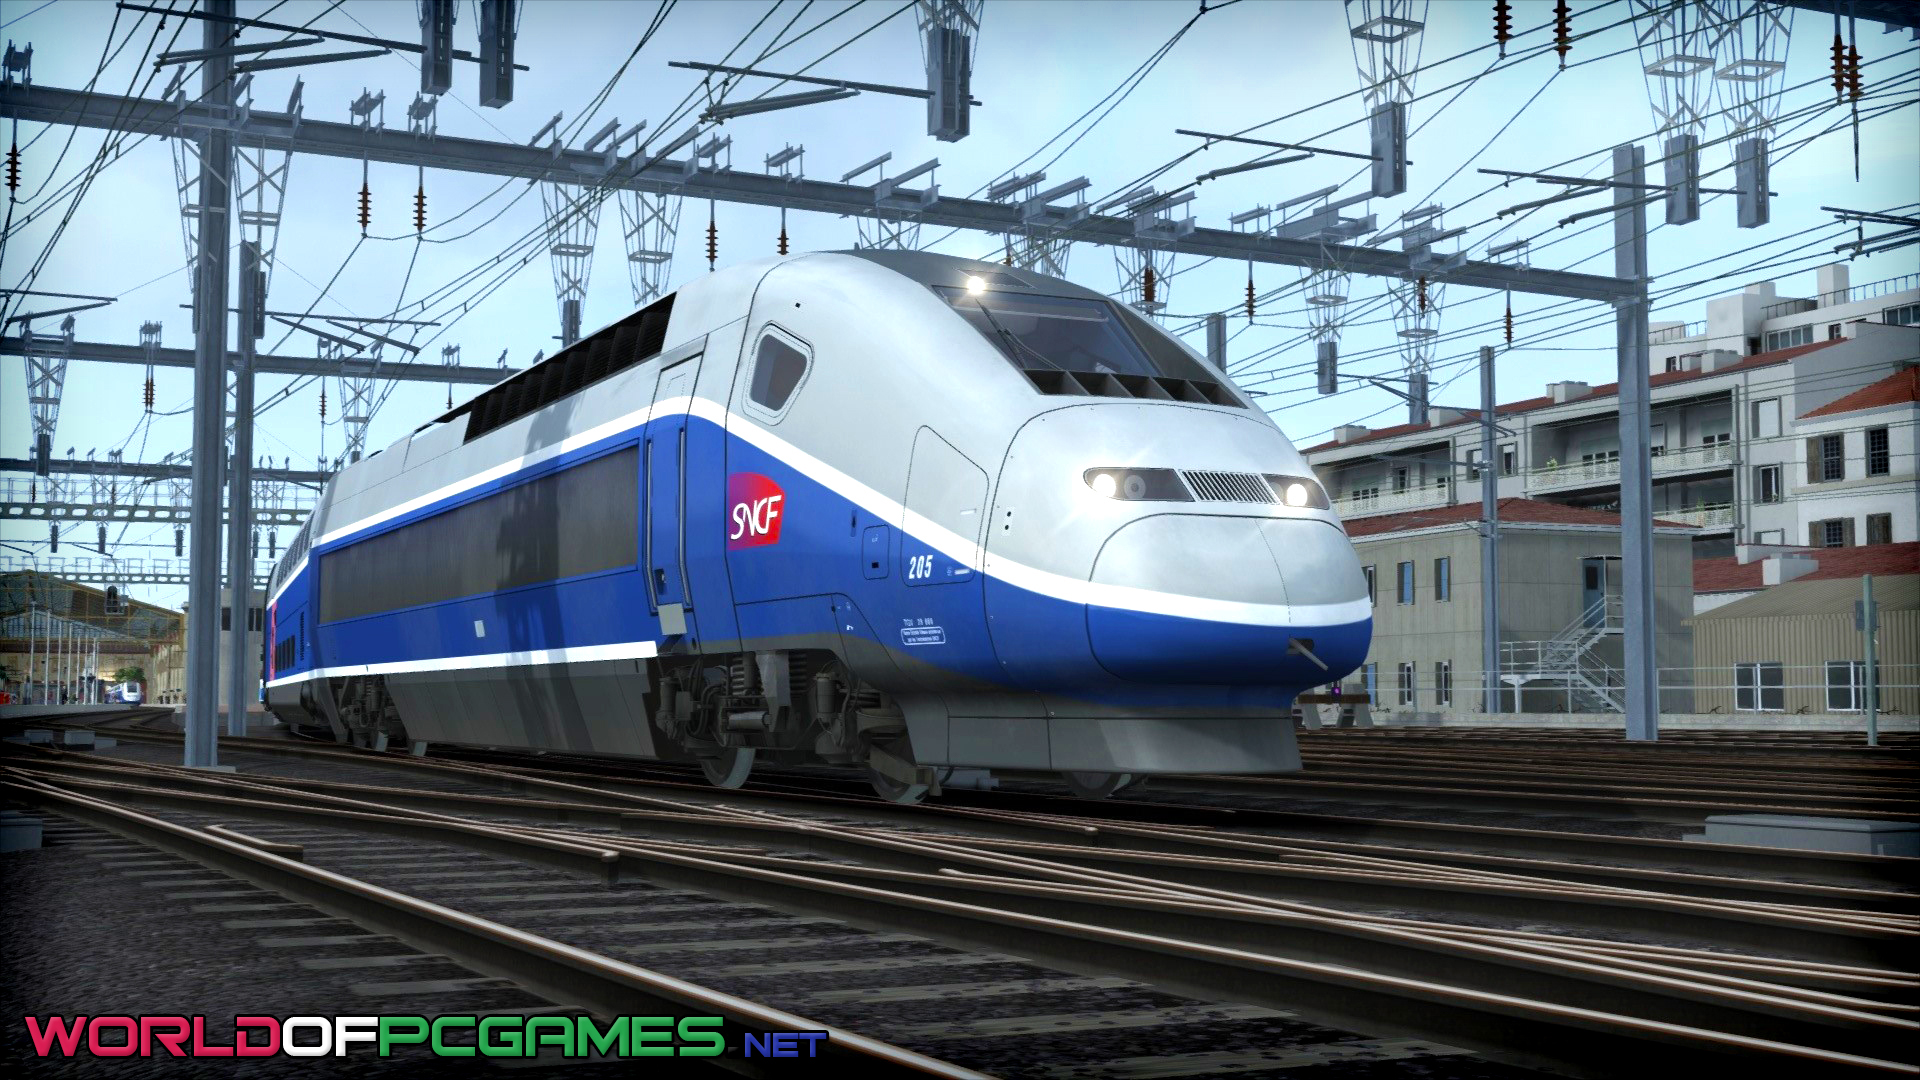 Train Simulator 2017 Free Download With All DLCs - 43